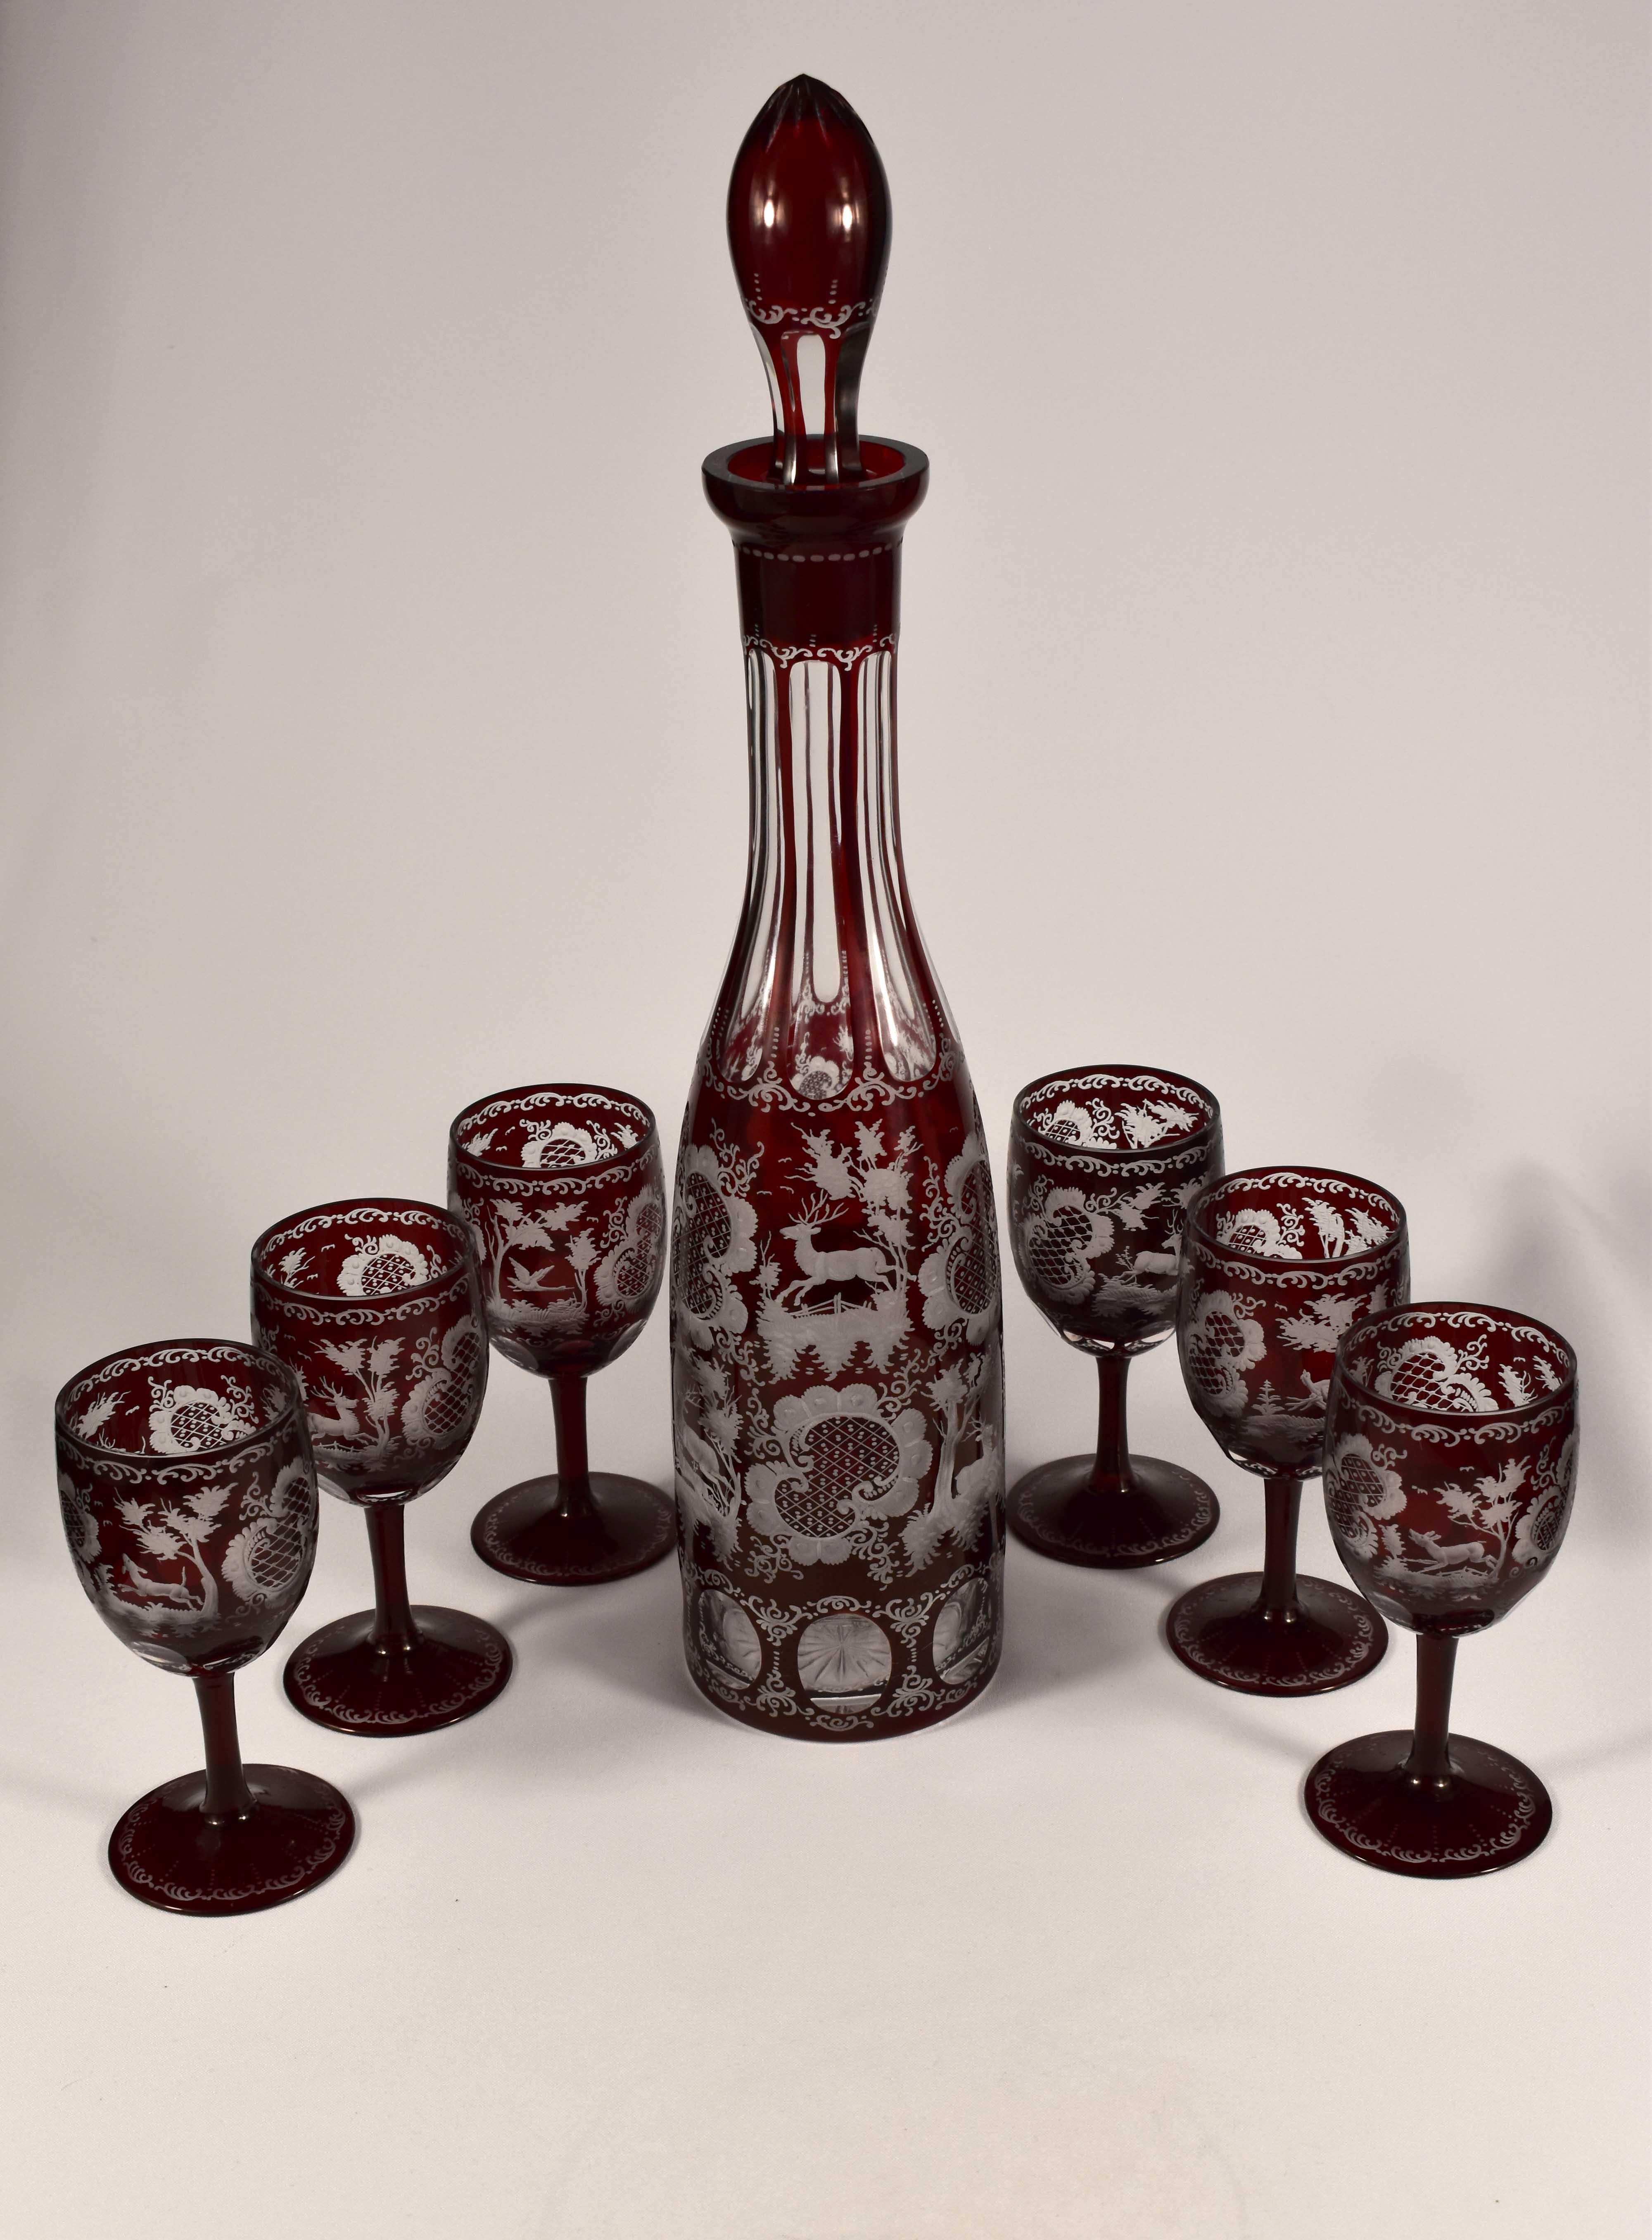 Beautiful wine set with carafe. Amazing work of Czech glassmakers. It is a clear glass with ruby glaze. The carafe and goblets are cut, they are engraved with a typical Egermann decor 19-20th century, it is an engraving with the old technique of